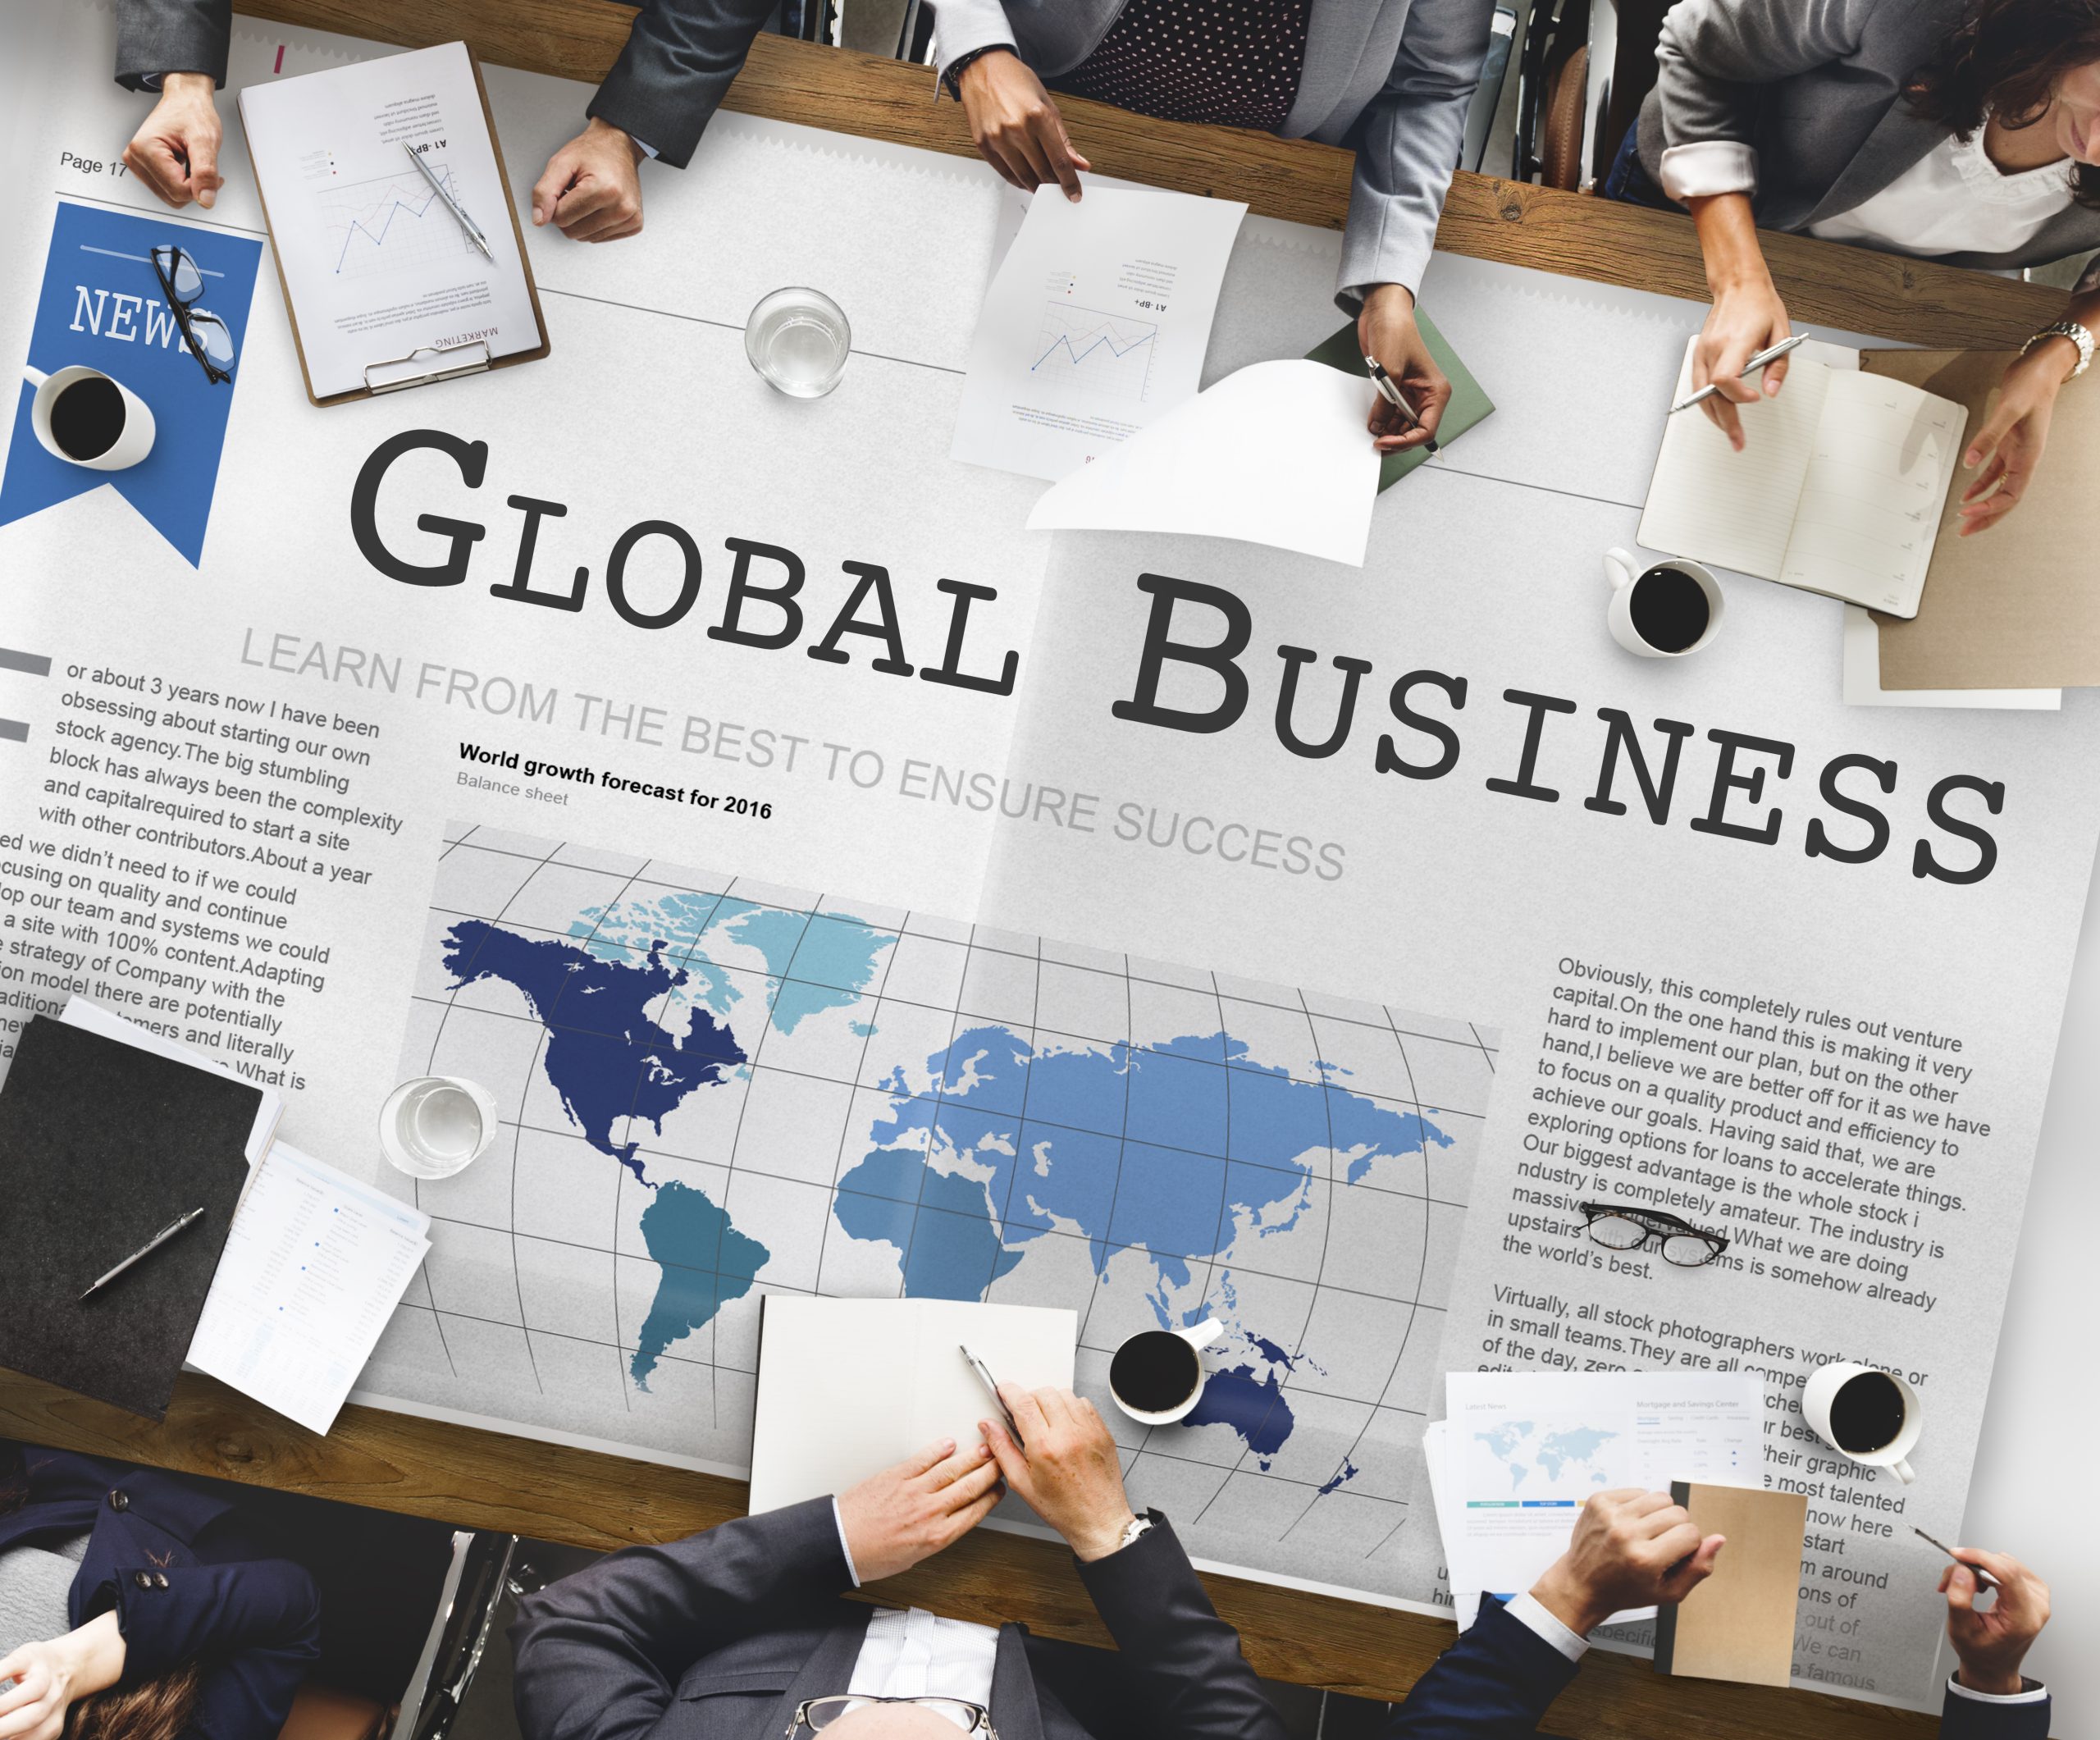 Image of global business newspaper for our article on 15 Subjects You’ll Study in an Online Global Business Degree Program